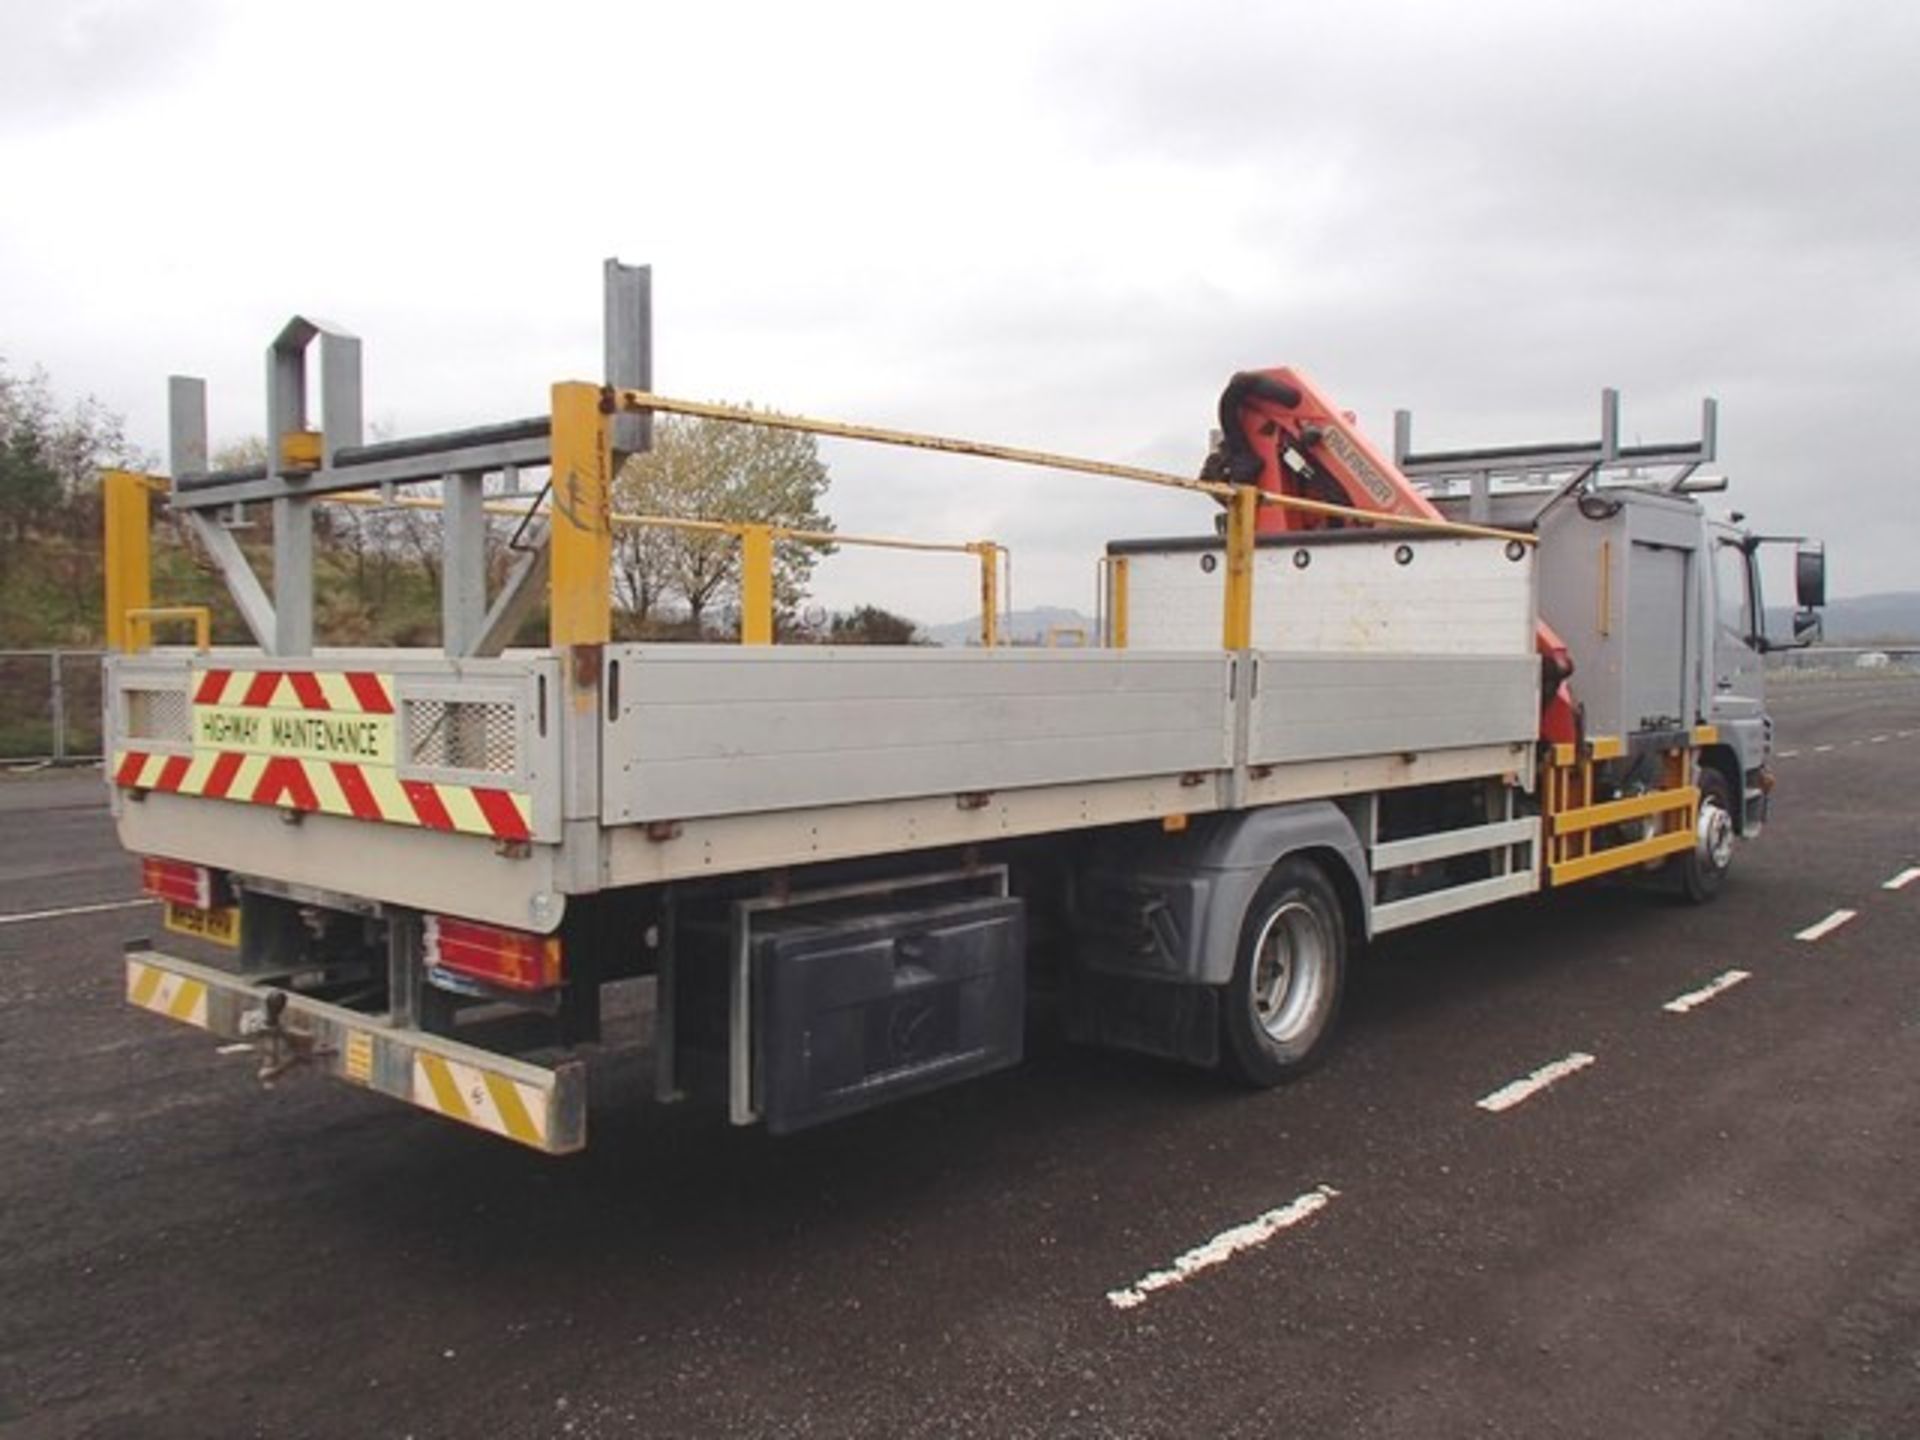 MERCEDES ATEGO - 4250cc DROPSIDE LORRY
Body: 2 Dr Truck
Color: Silver
First Reg: 29/01/2009
Doors: 2 - Image 4 of 22